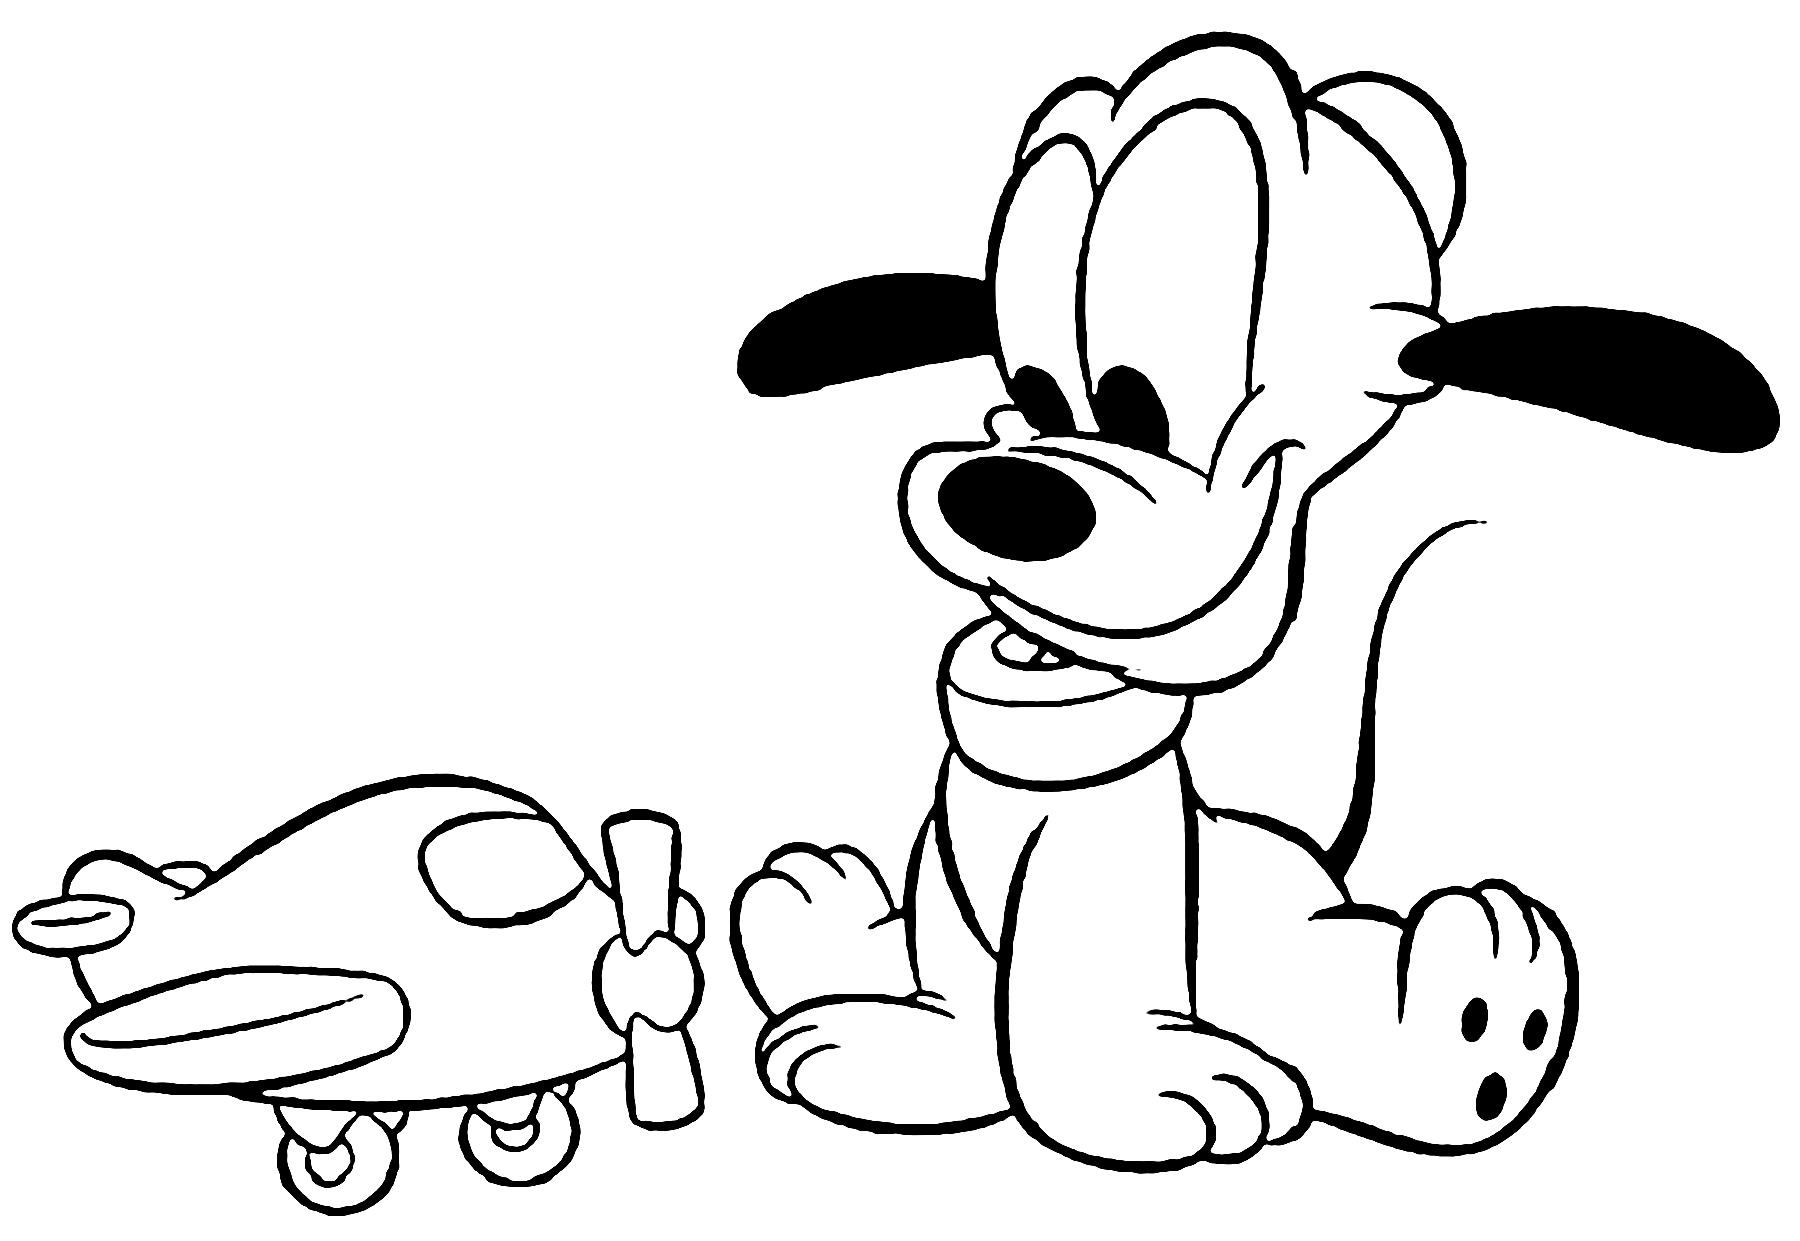 Printable Coloring Image of Baby Pluto Puppy Playing with his Toy Plane